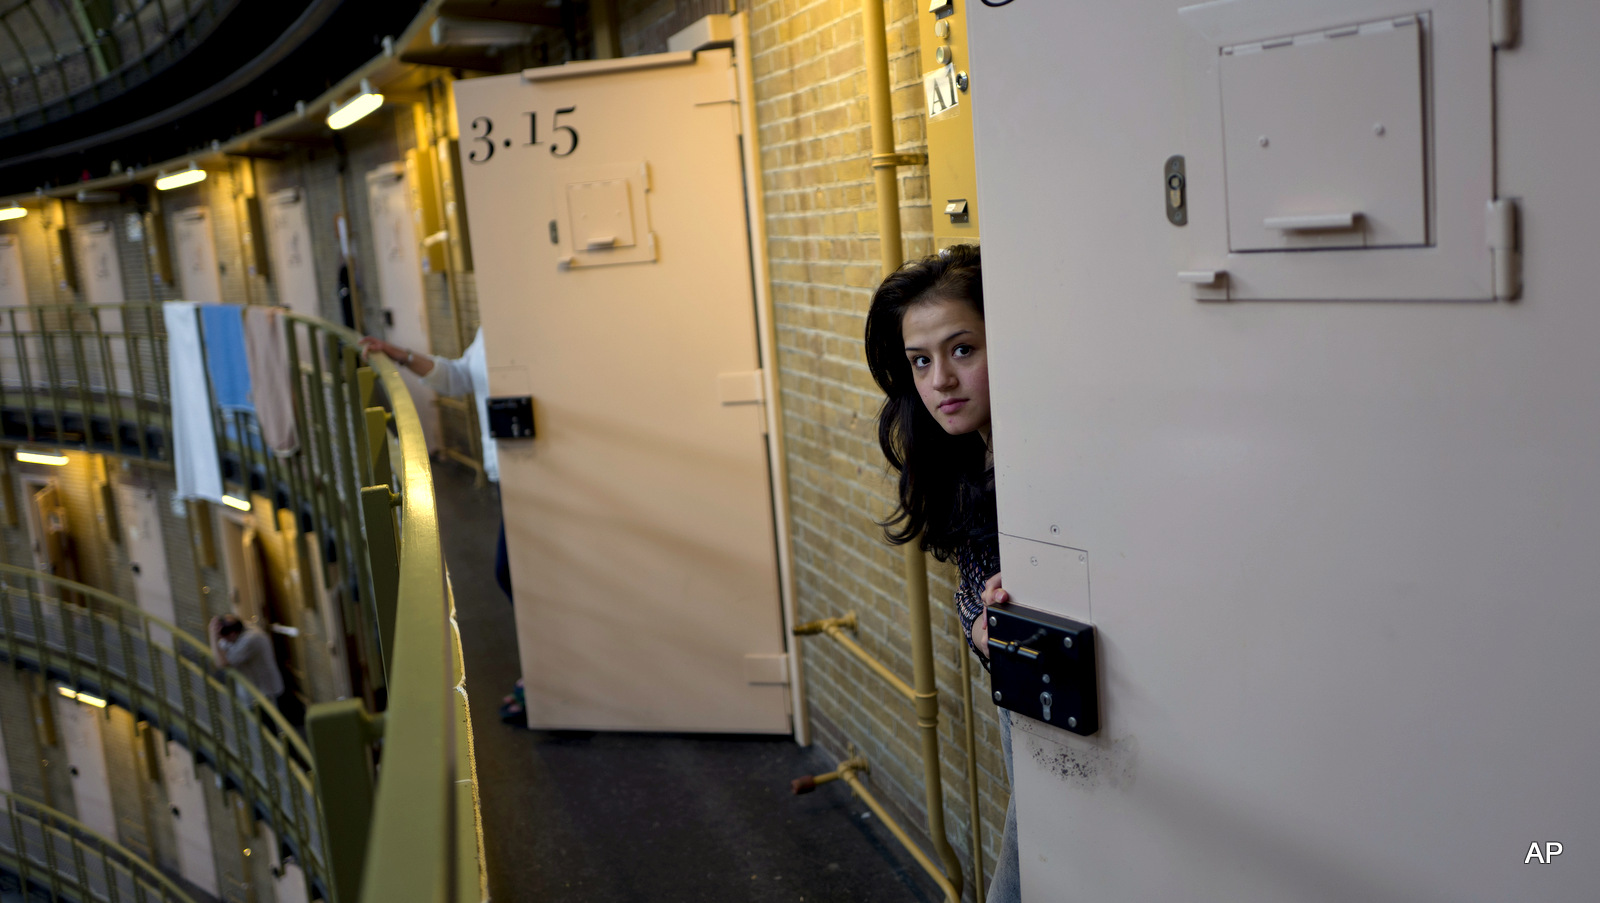 In this Saturday, May 7, 2016 photo, Afghan refugee Shazia Lutfi, 19, peeks through the door of her cell at the former prison of De Koepel in Haarlem, Netherlands. The government has let Belgium and Norway put prisoners in its empty cells and now, amid the huge flow of migrants into Europe, several Dutch prisons have been temporarily pressed into service as asylum seeker centers.